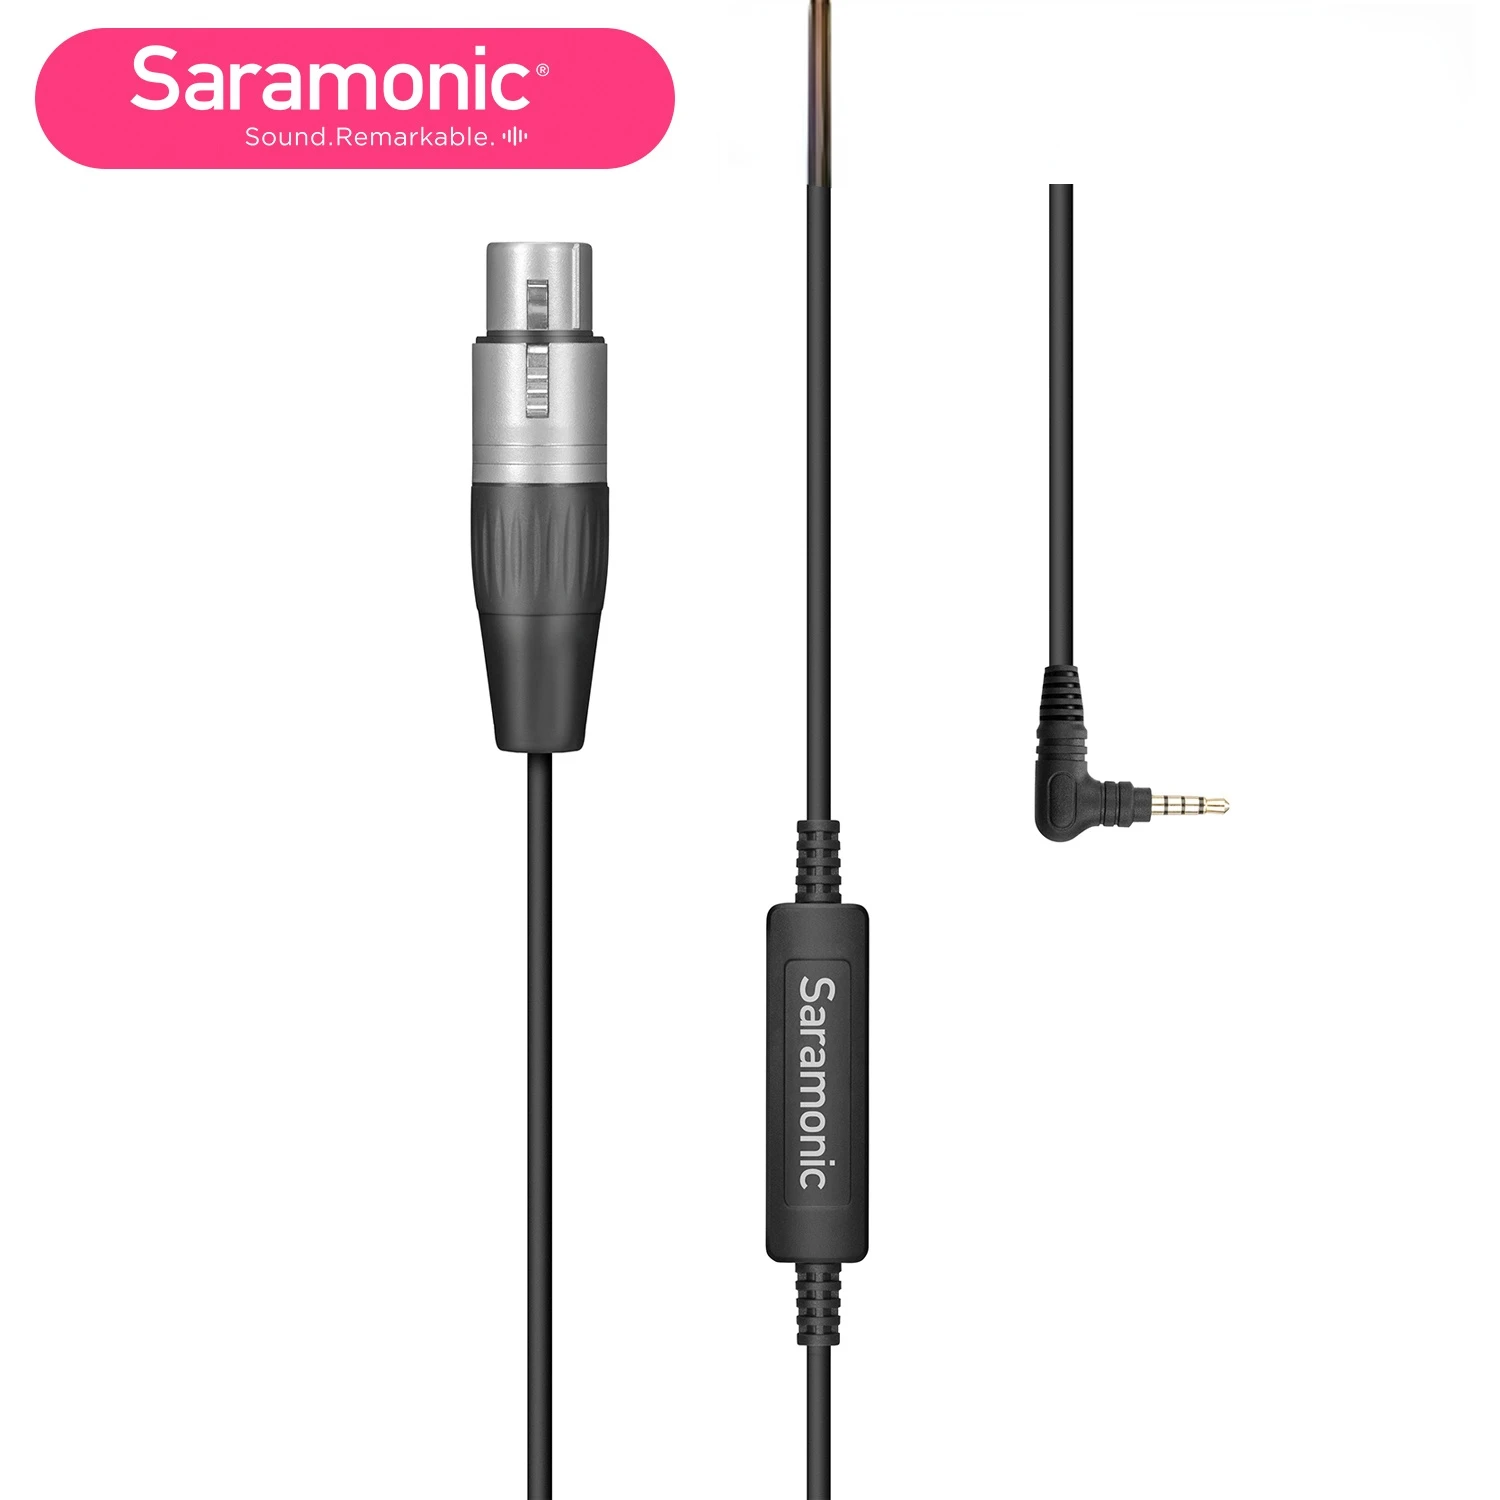 

Saramonic SR-XLR35 Microphone Cables 3.5mm TRRS to 3 Pin XLR Female Jack for Smartphone Ipad iPod TRRS Devices